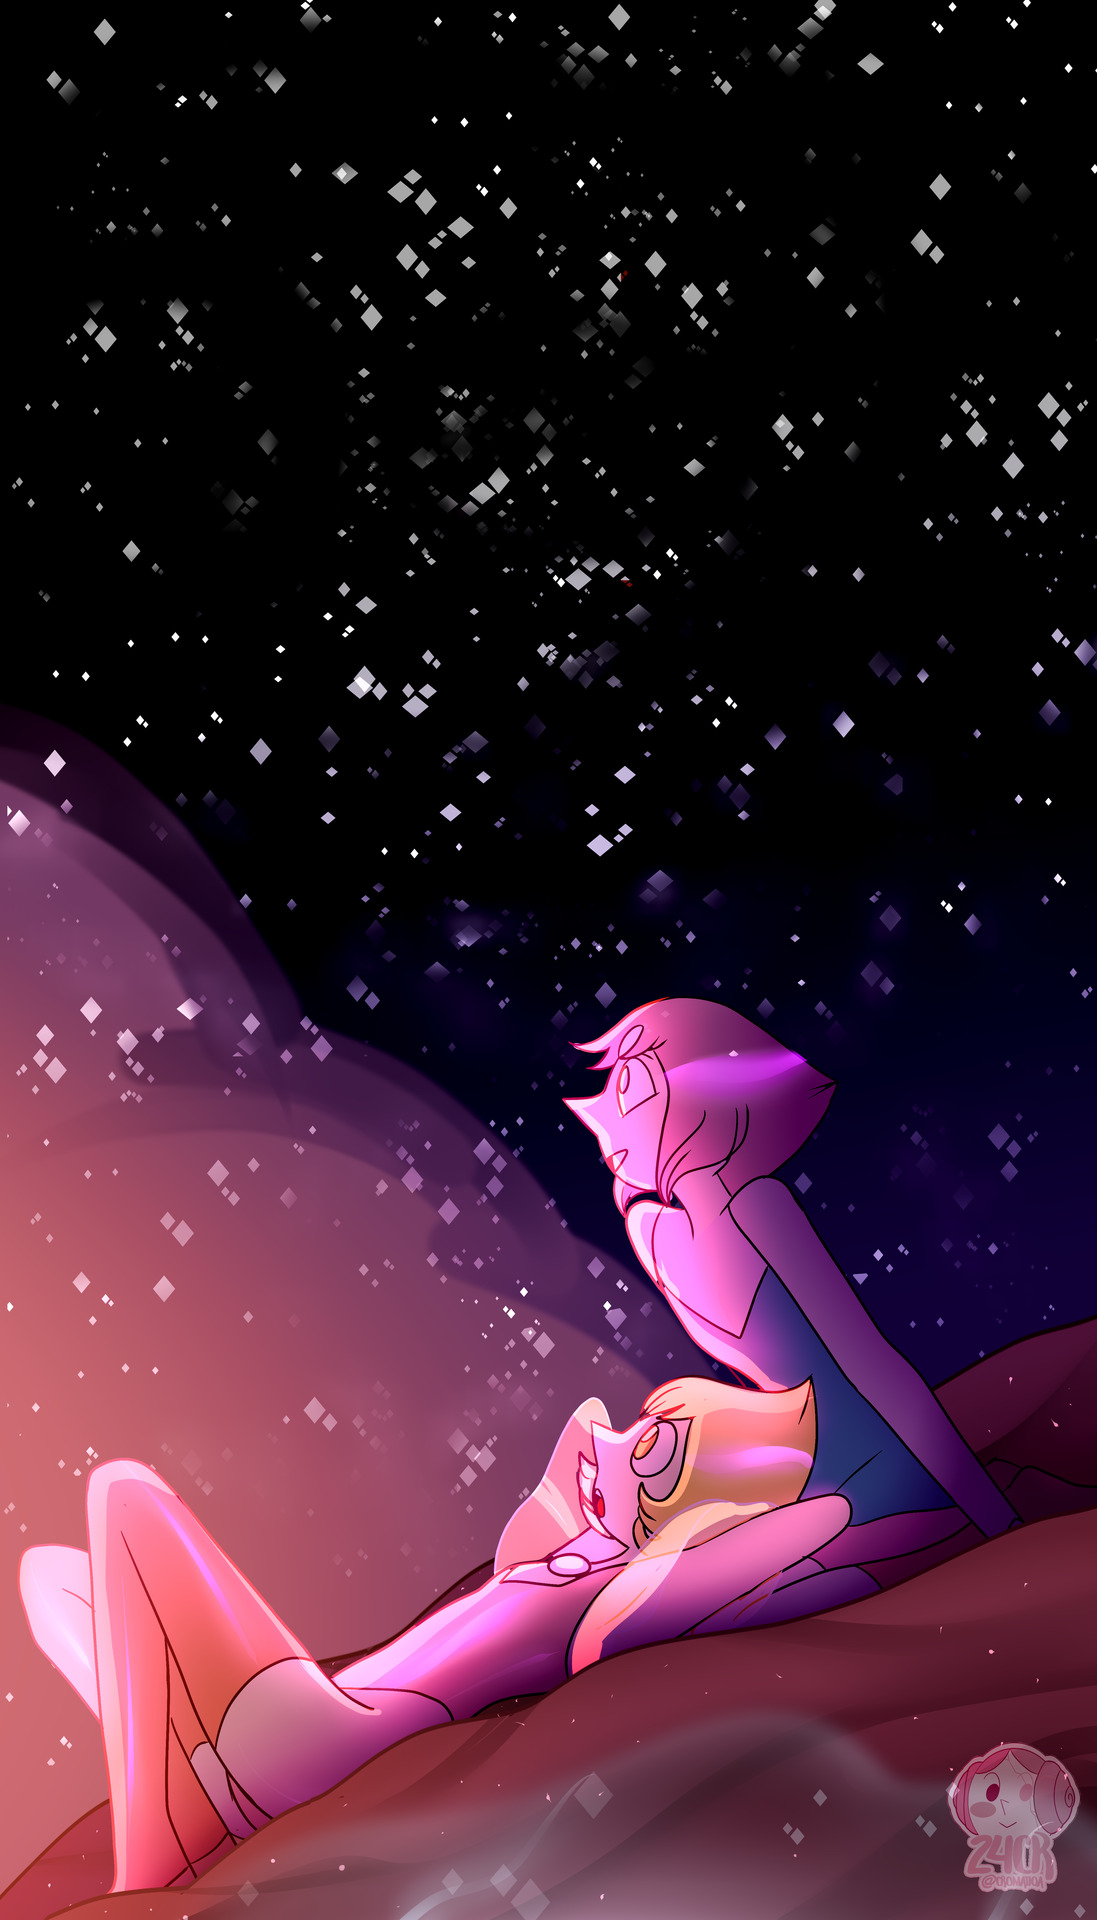 commission for pearldefiance of Pearl and Yellow Pearl looking at the stars.